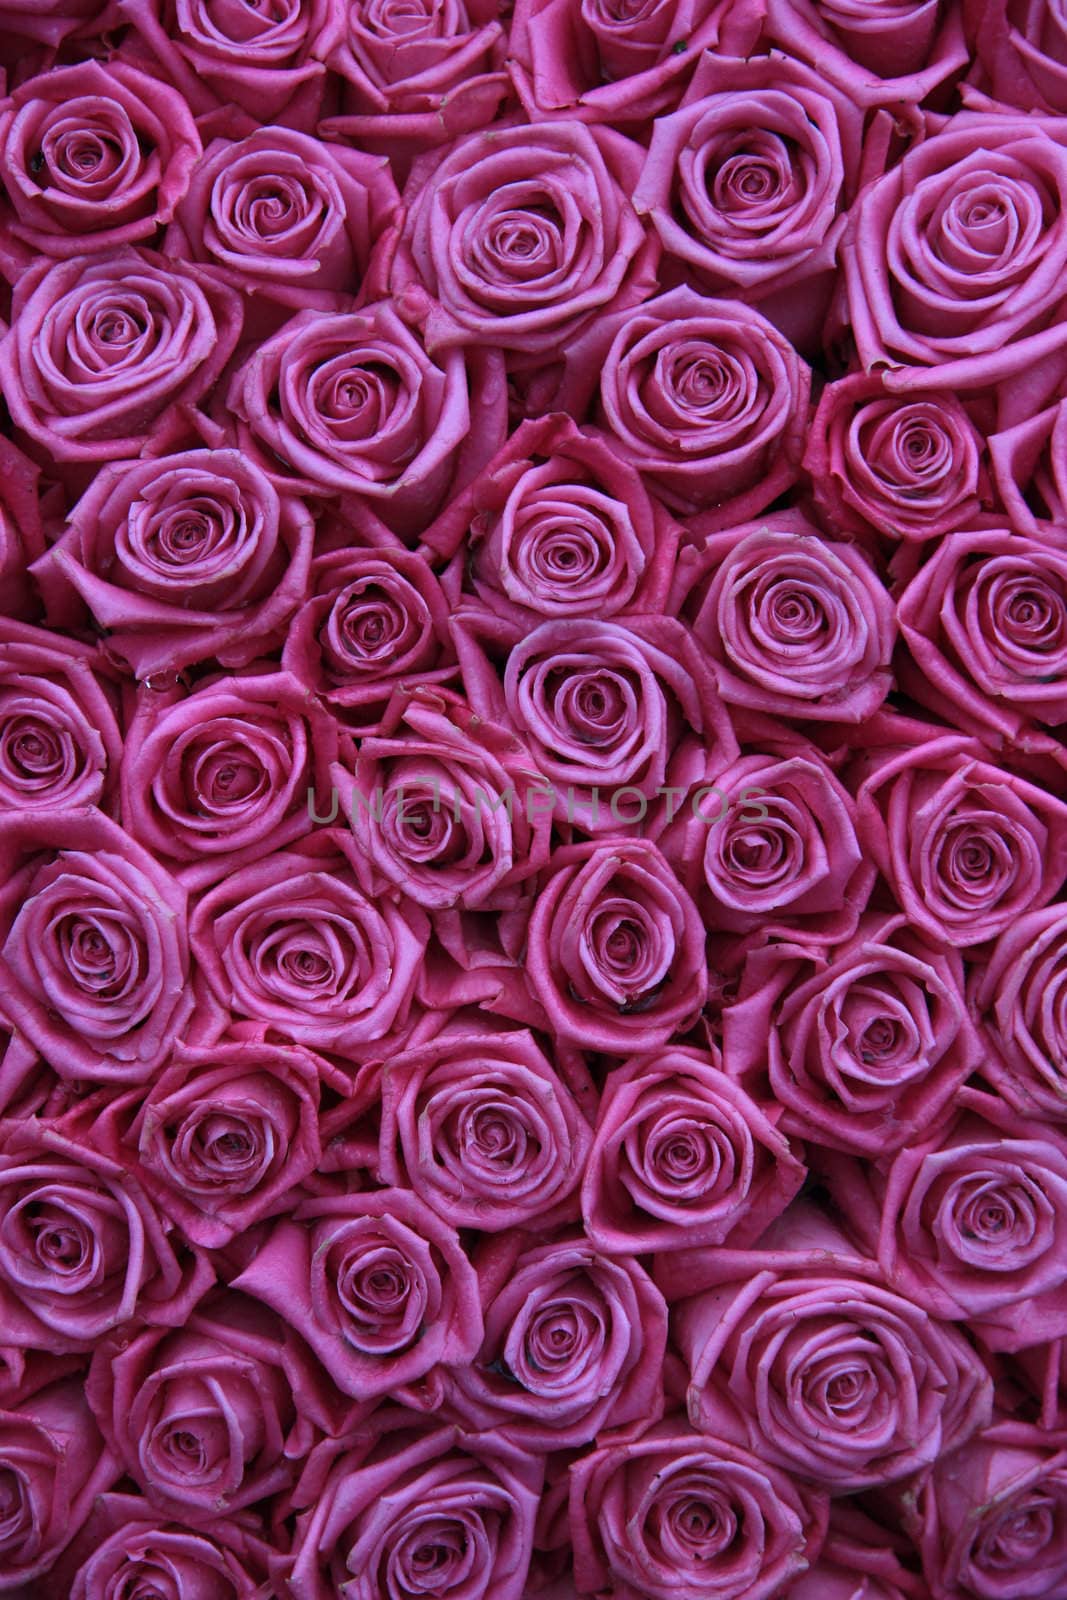 group of pink roses by studioportosabbia